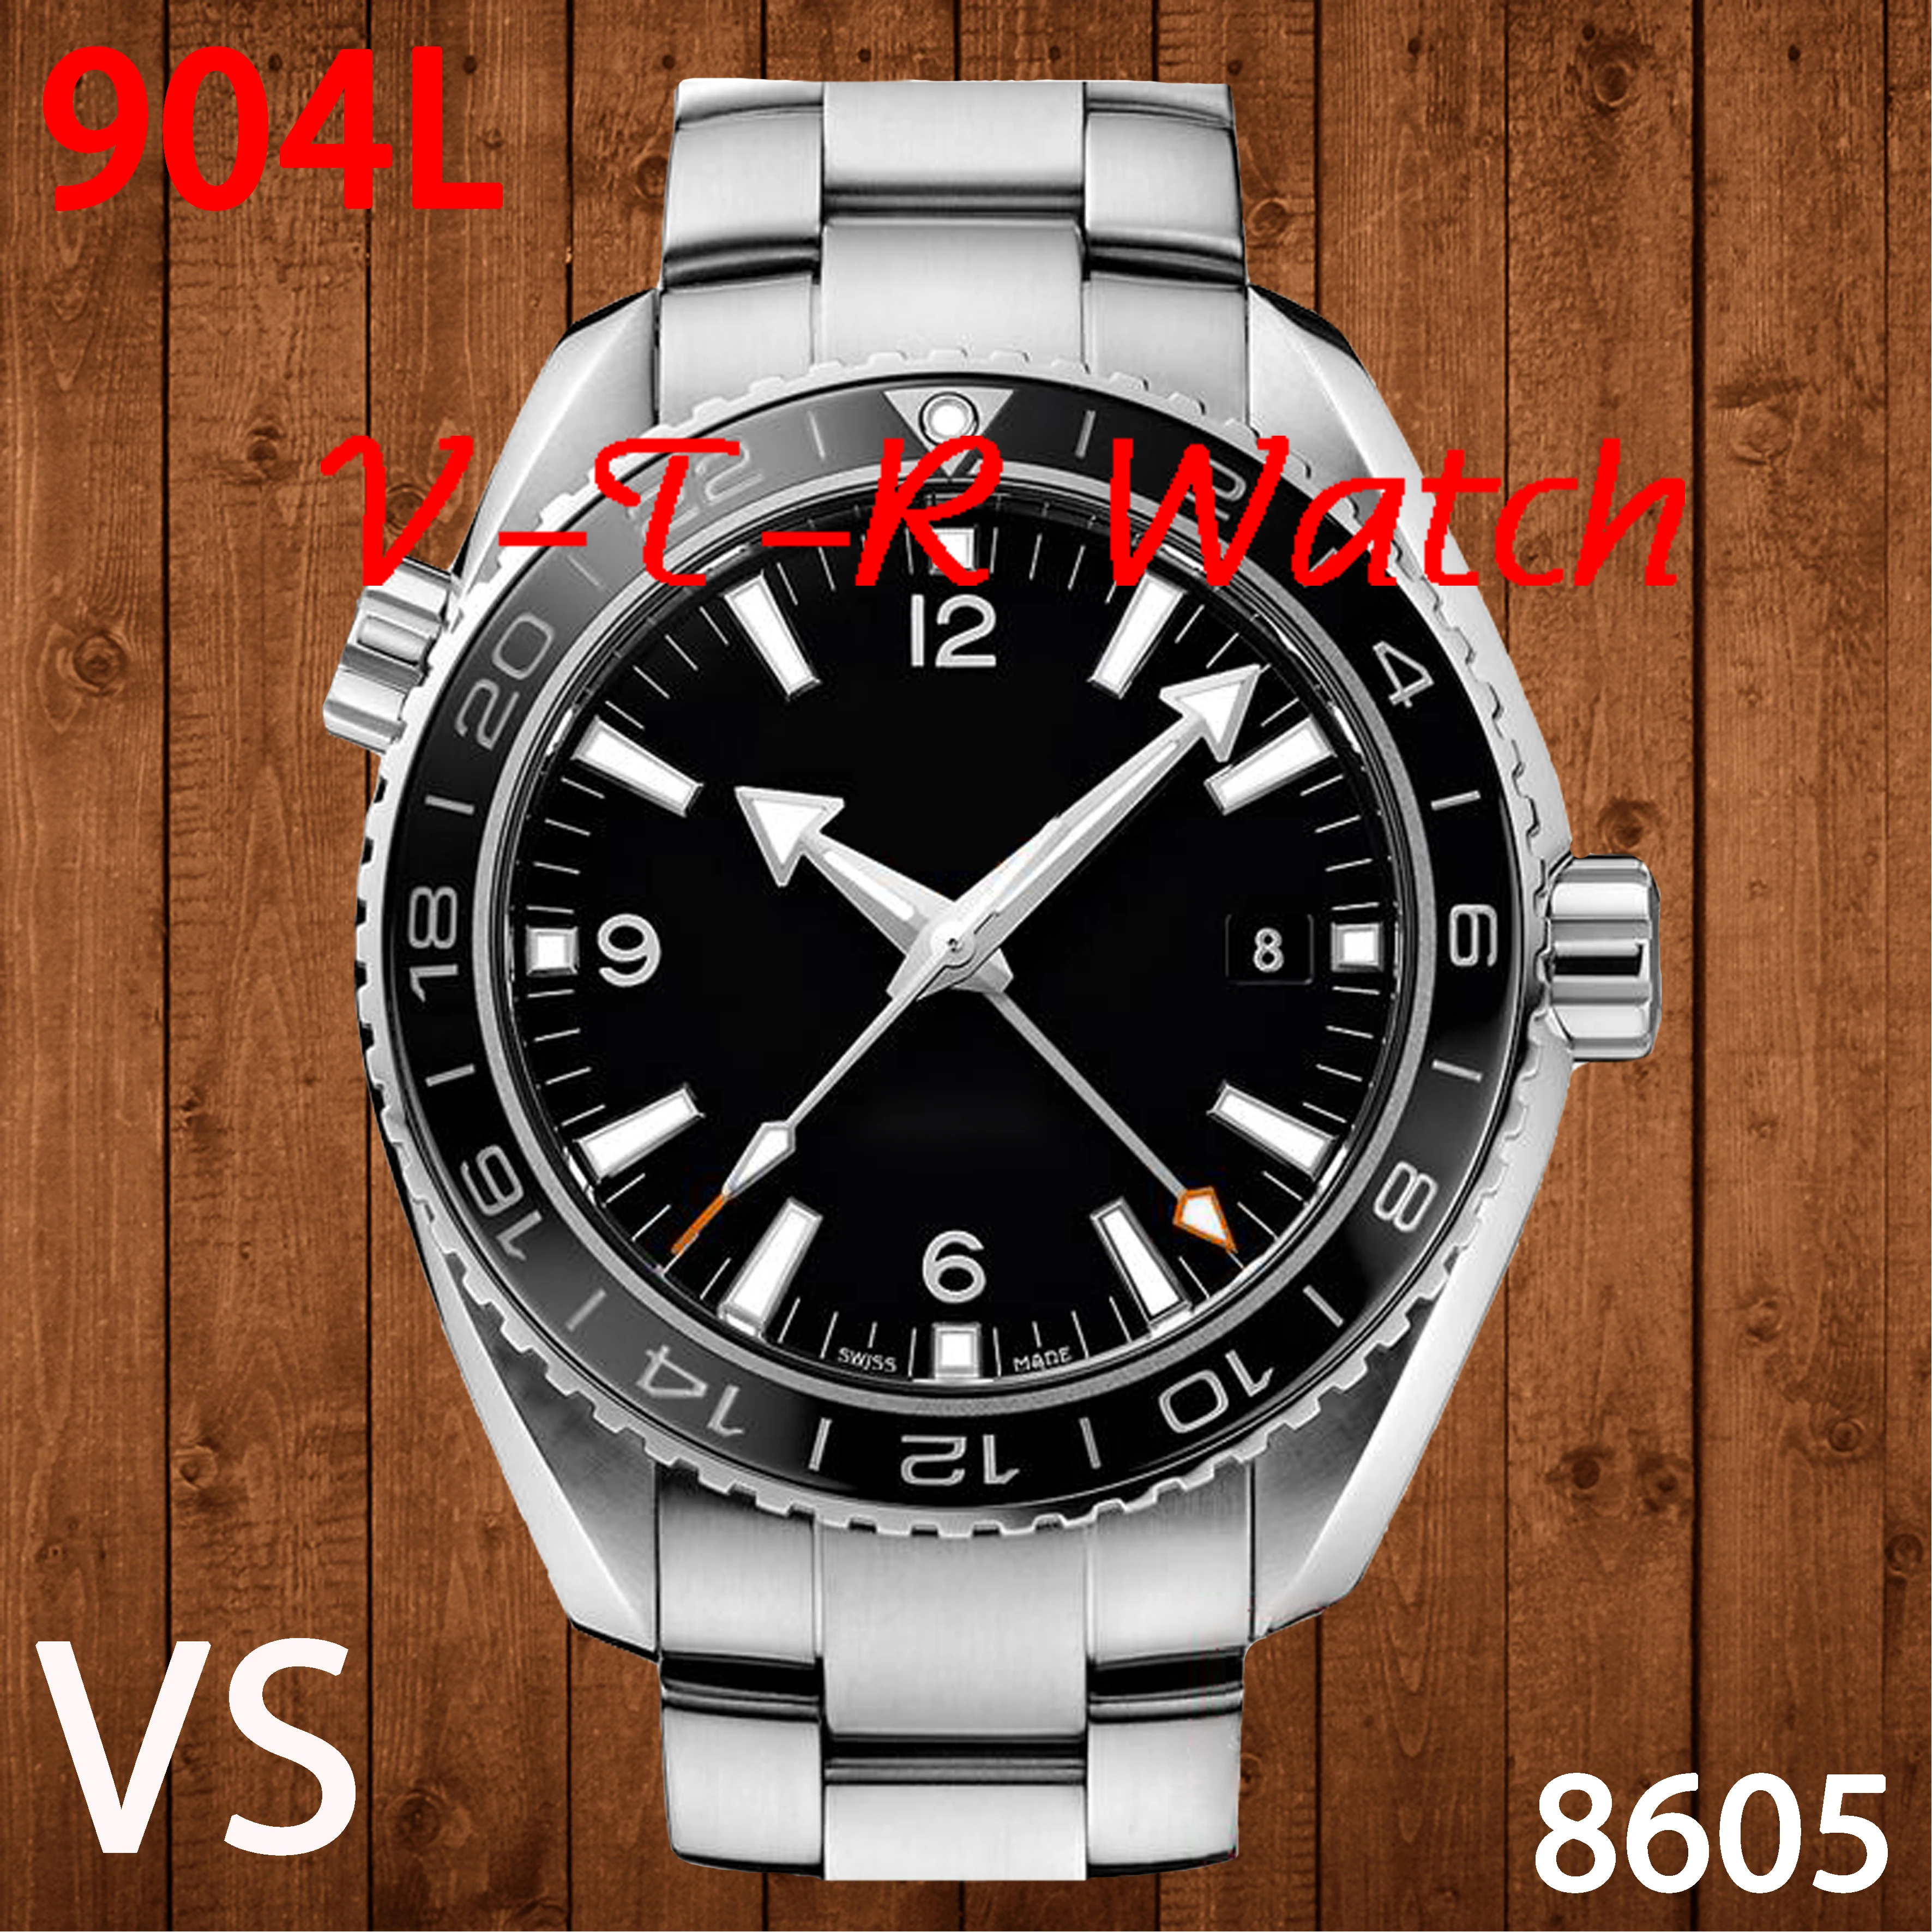 

Men's Mechanical Diving Watch 600M GMT 43.5mm VSF 316L Stainless Steel Bracelet Best Edition 1:1 A8605 Clone AAA Watch Replica